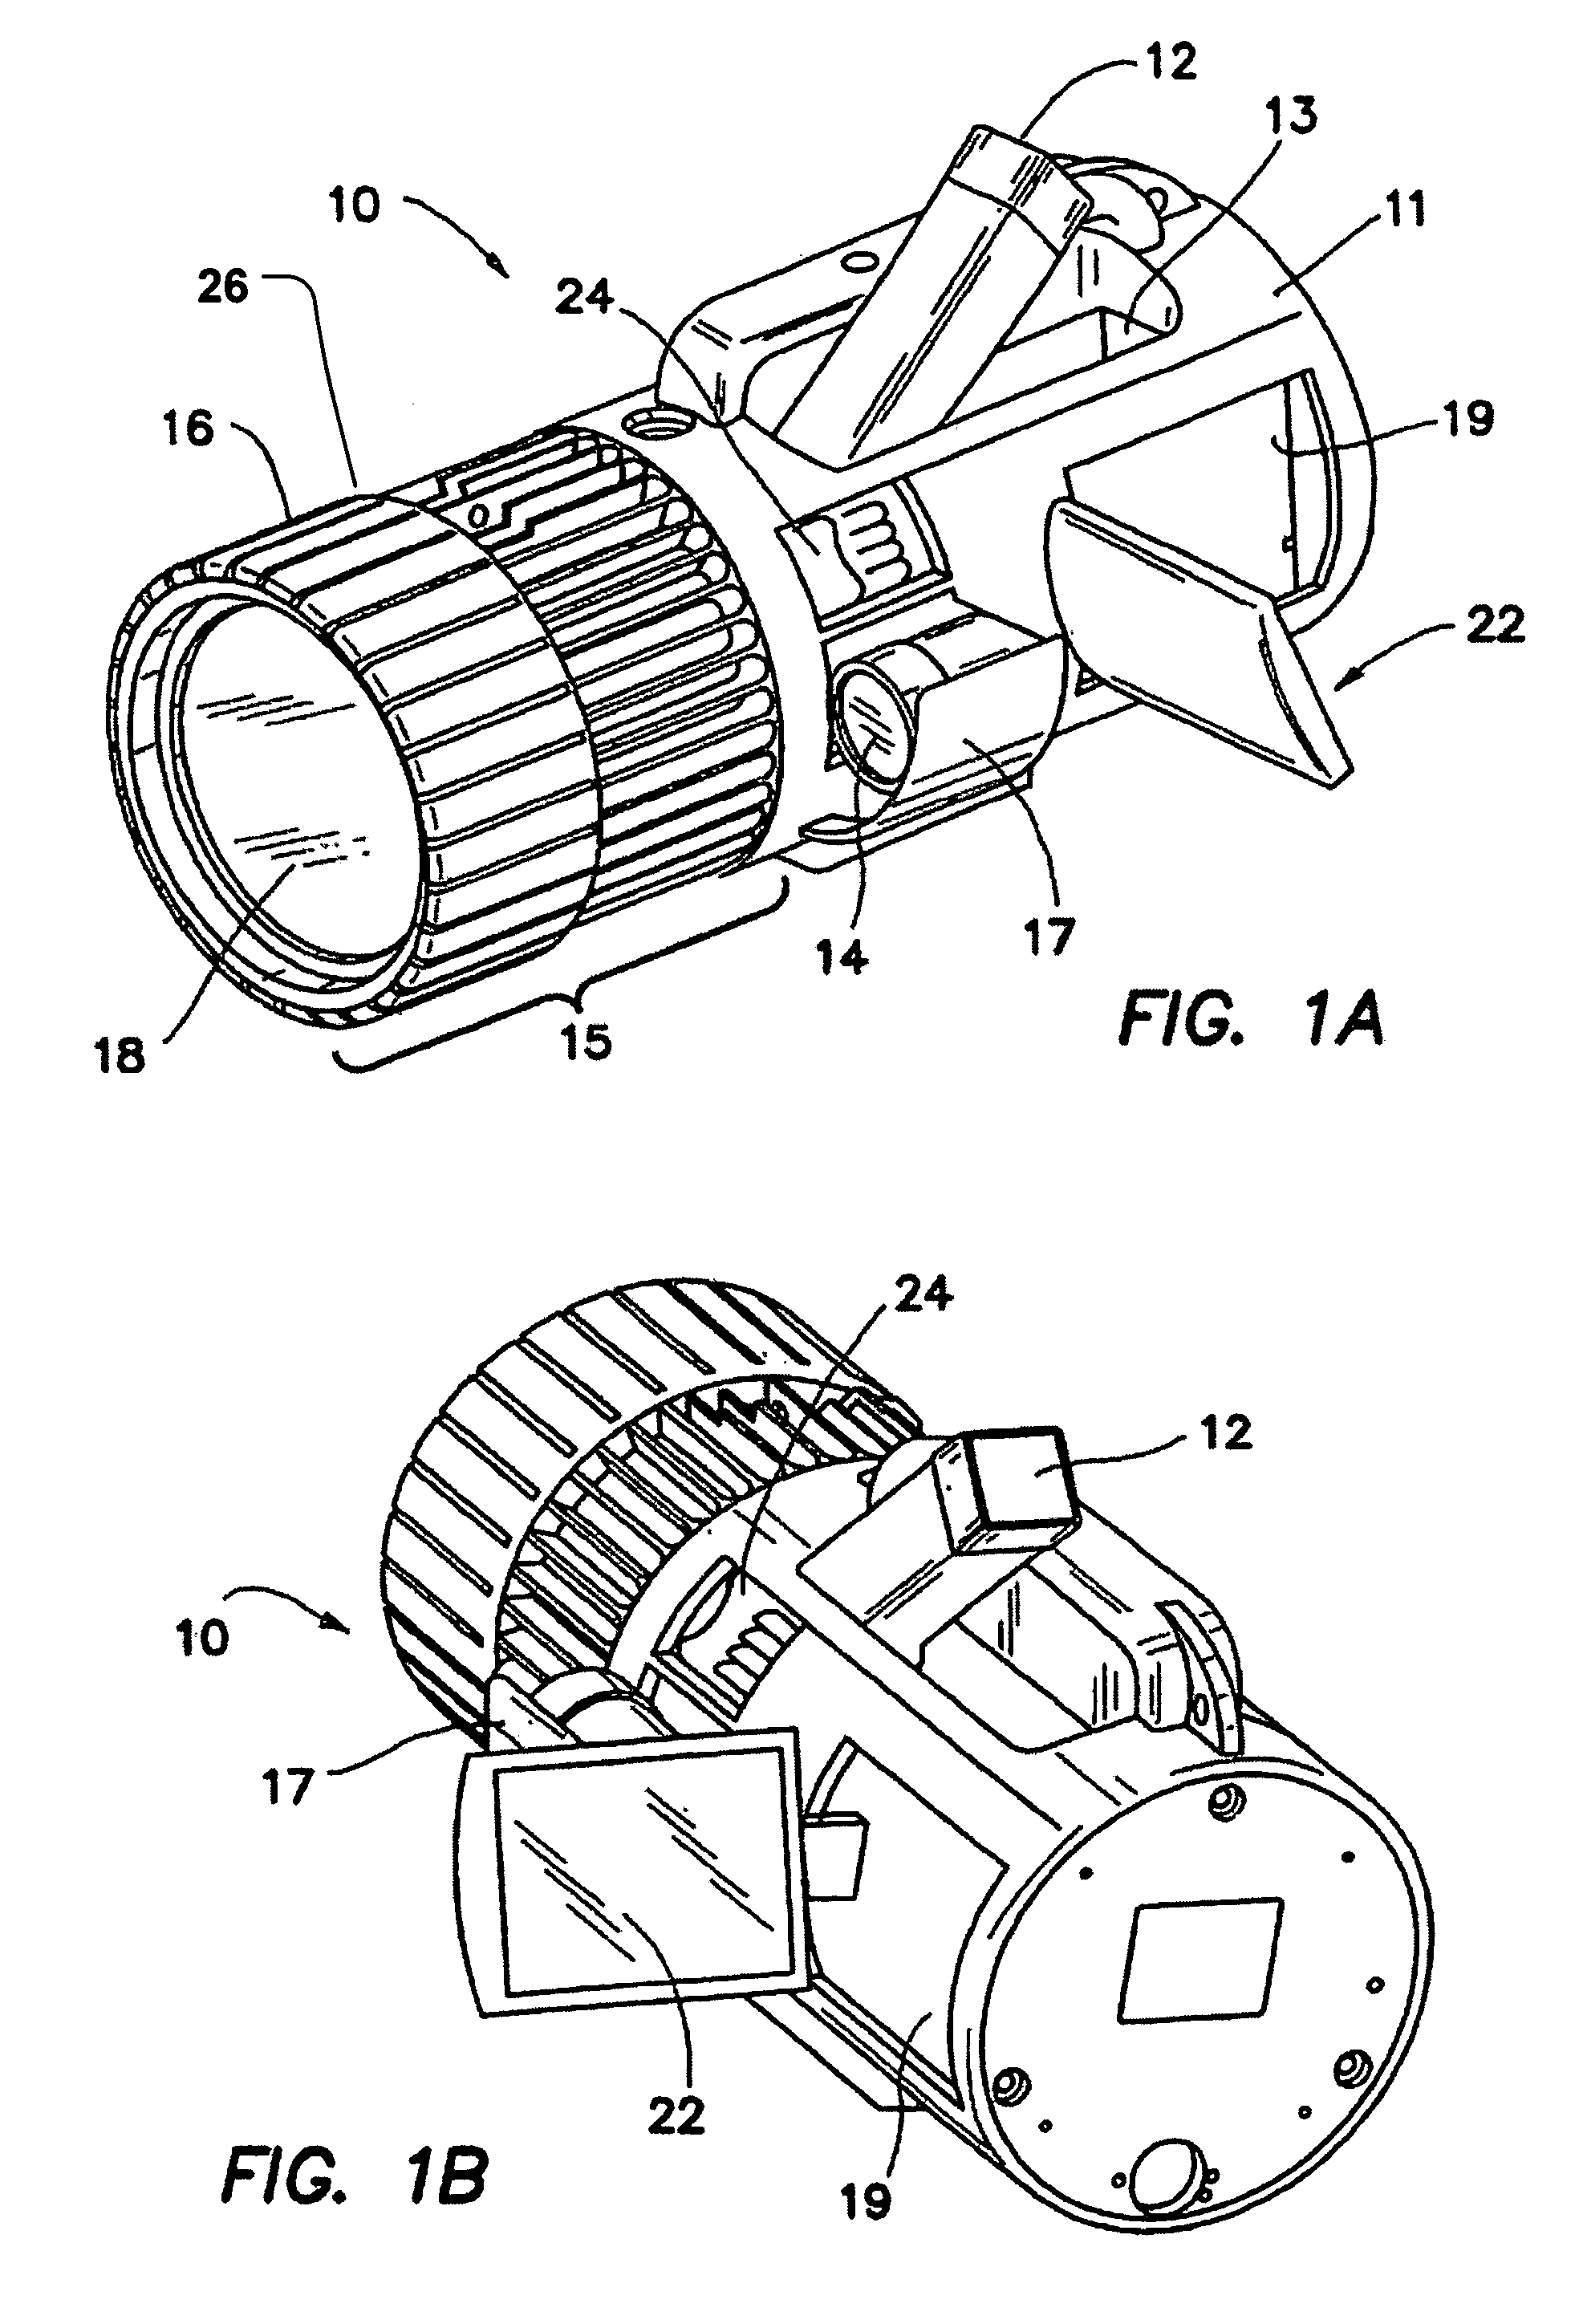 Portable device for viewing and imaging